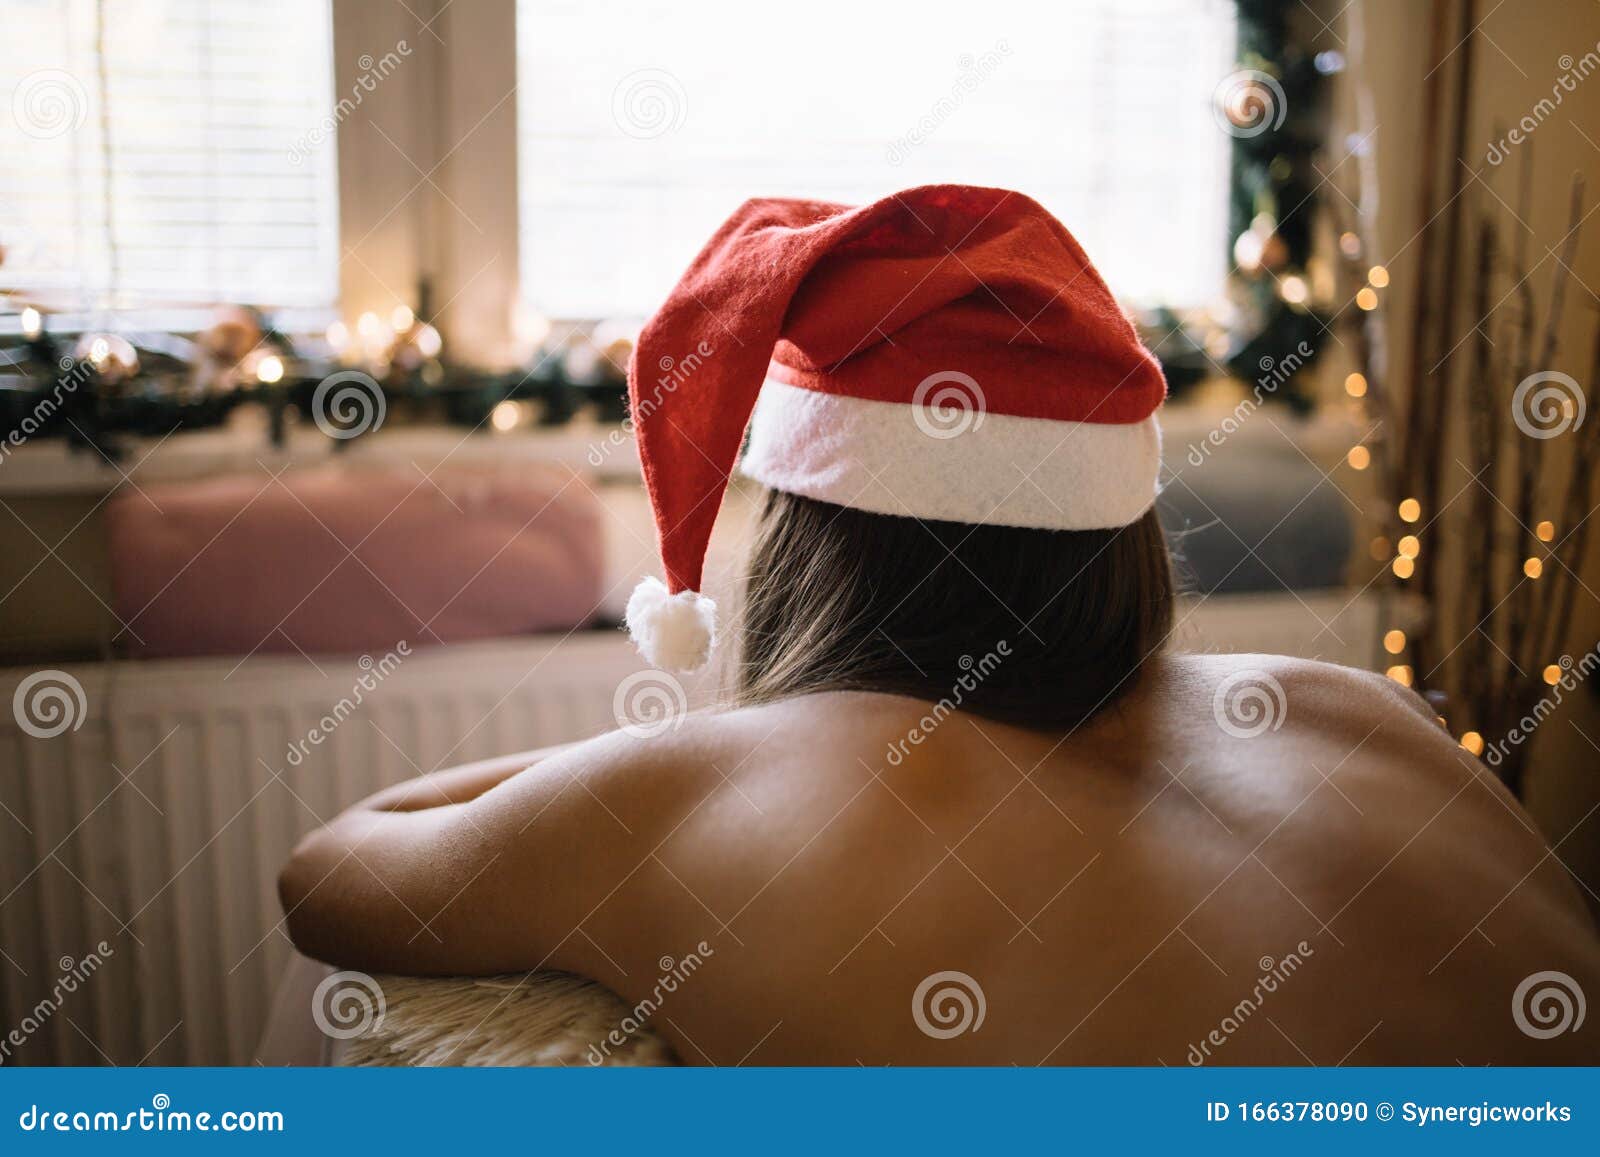 Young Girl Wearing Santa Hat Lying on Massage Table Stock Photo photo